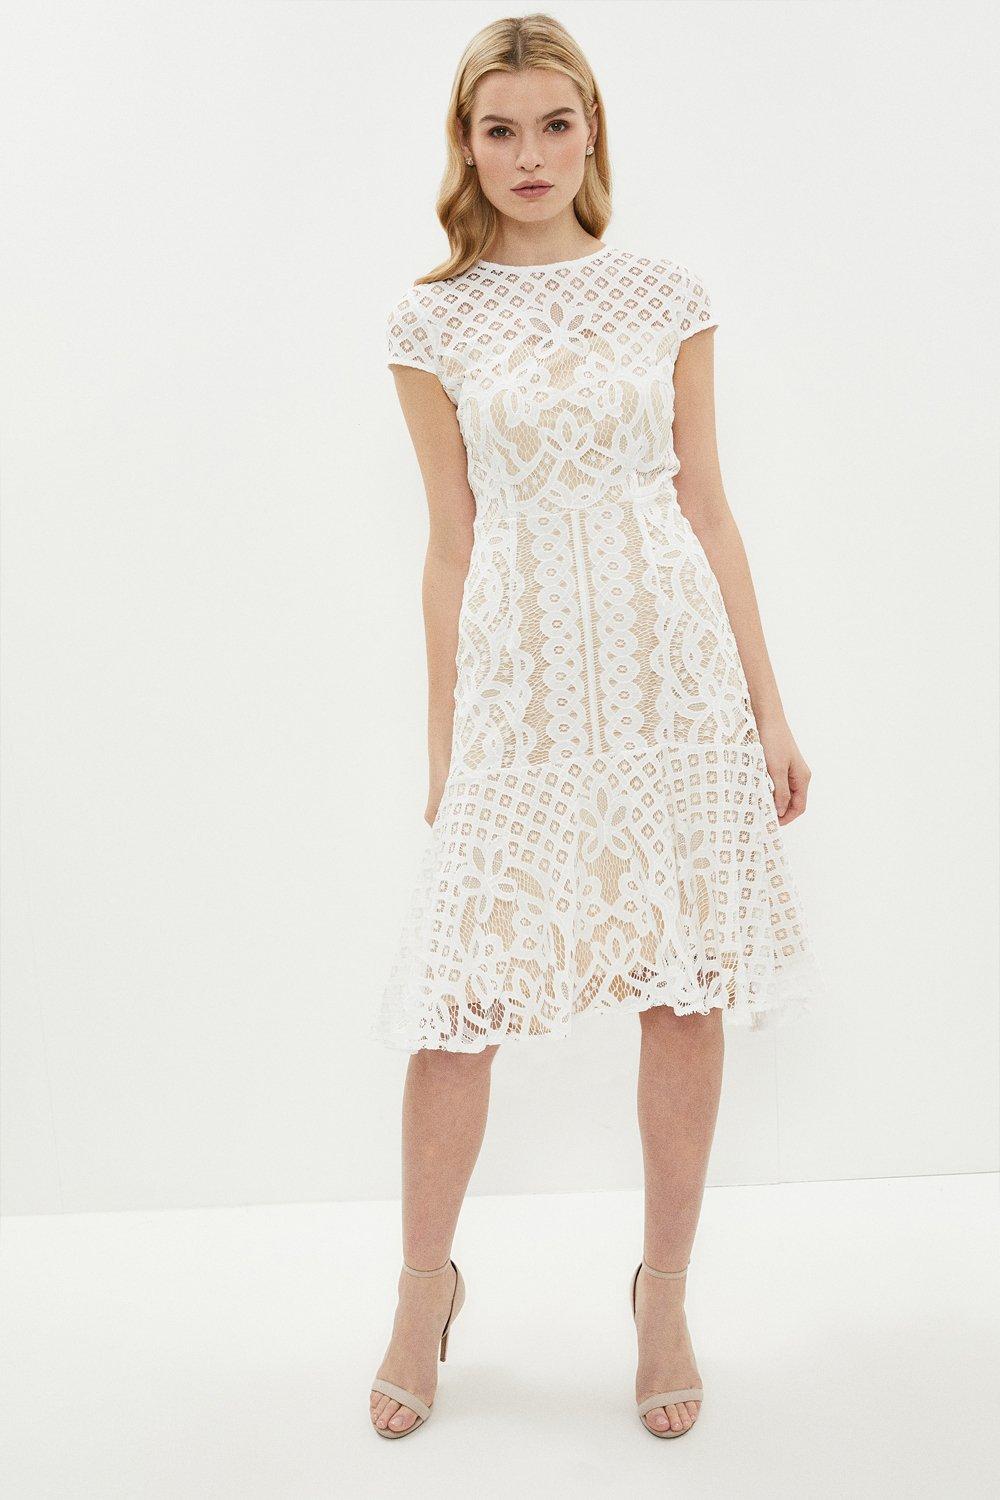 Capped Sleeve Lace Dress - Cream